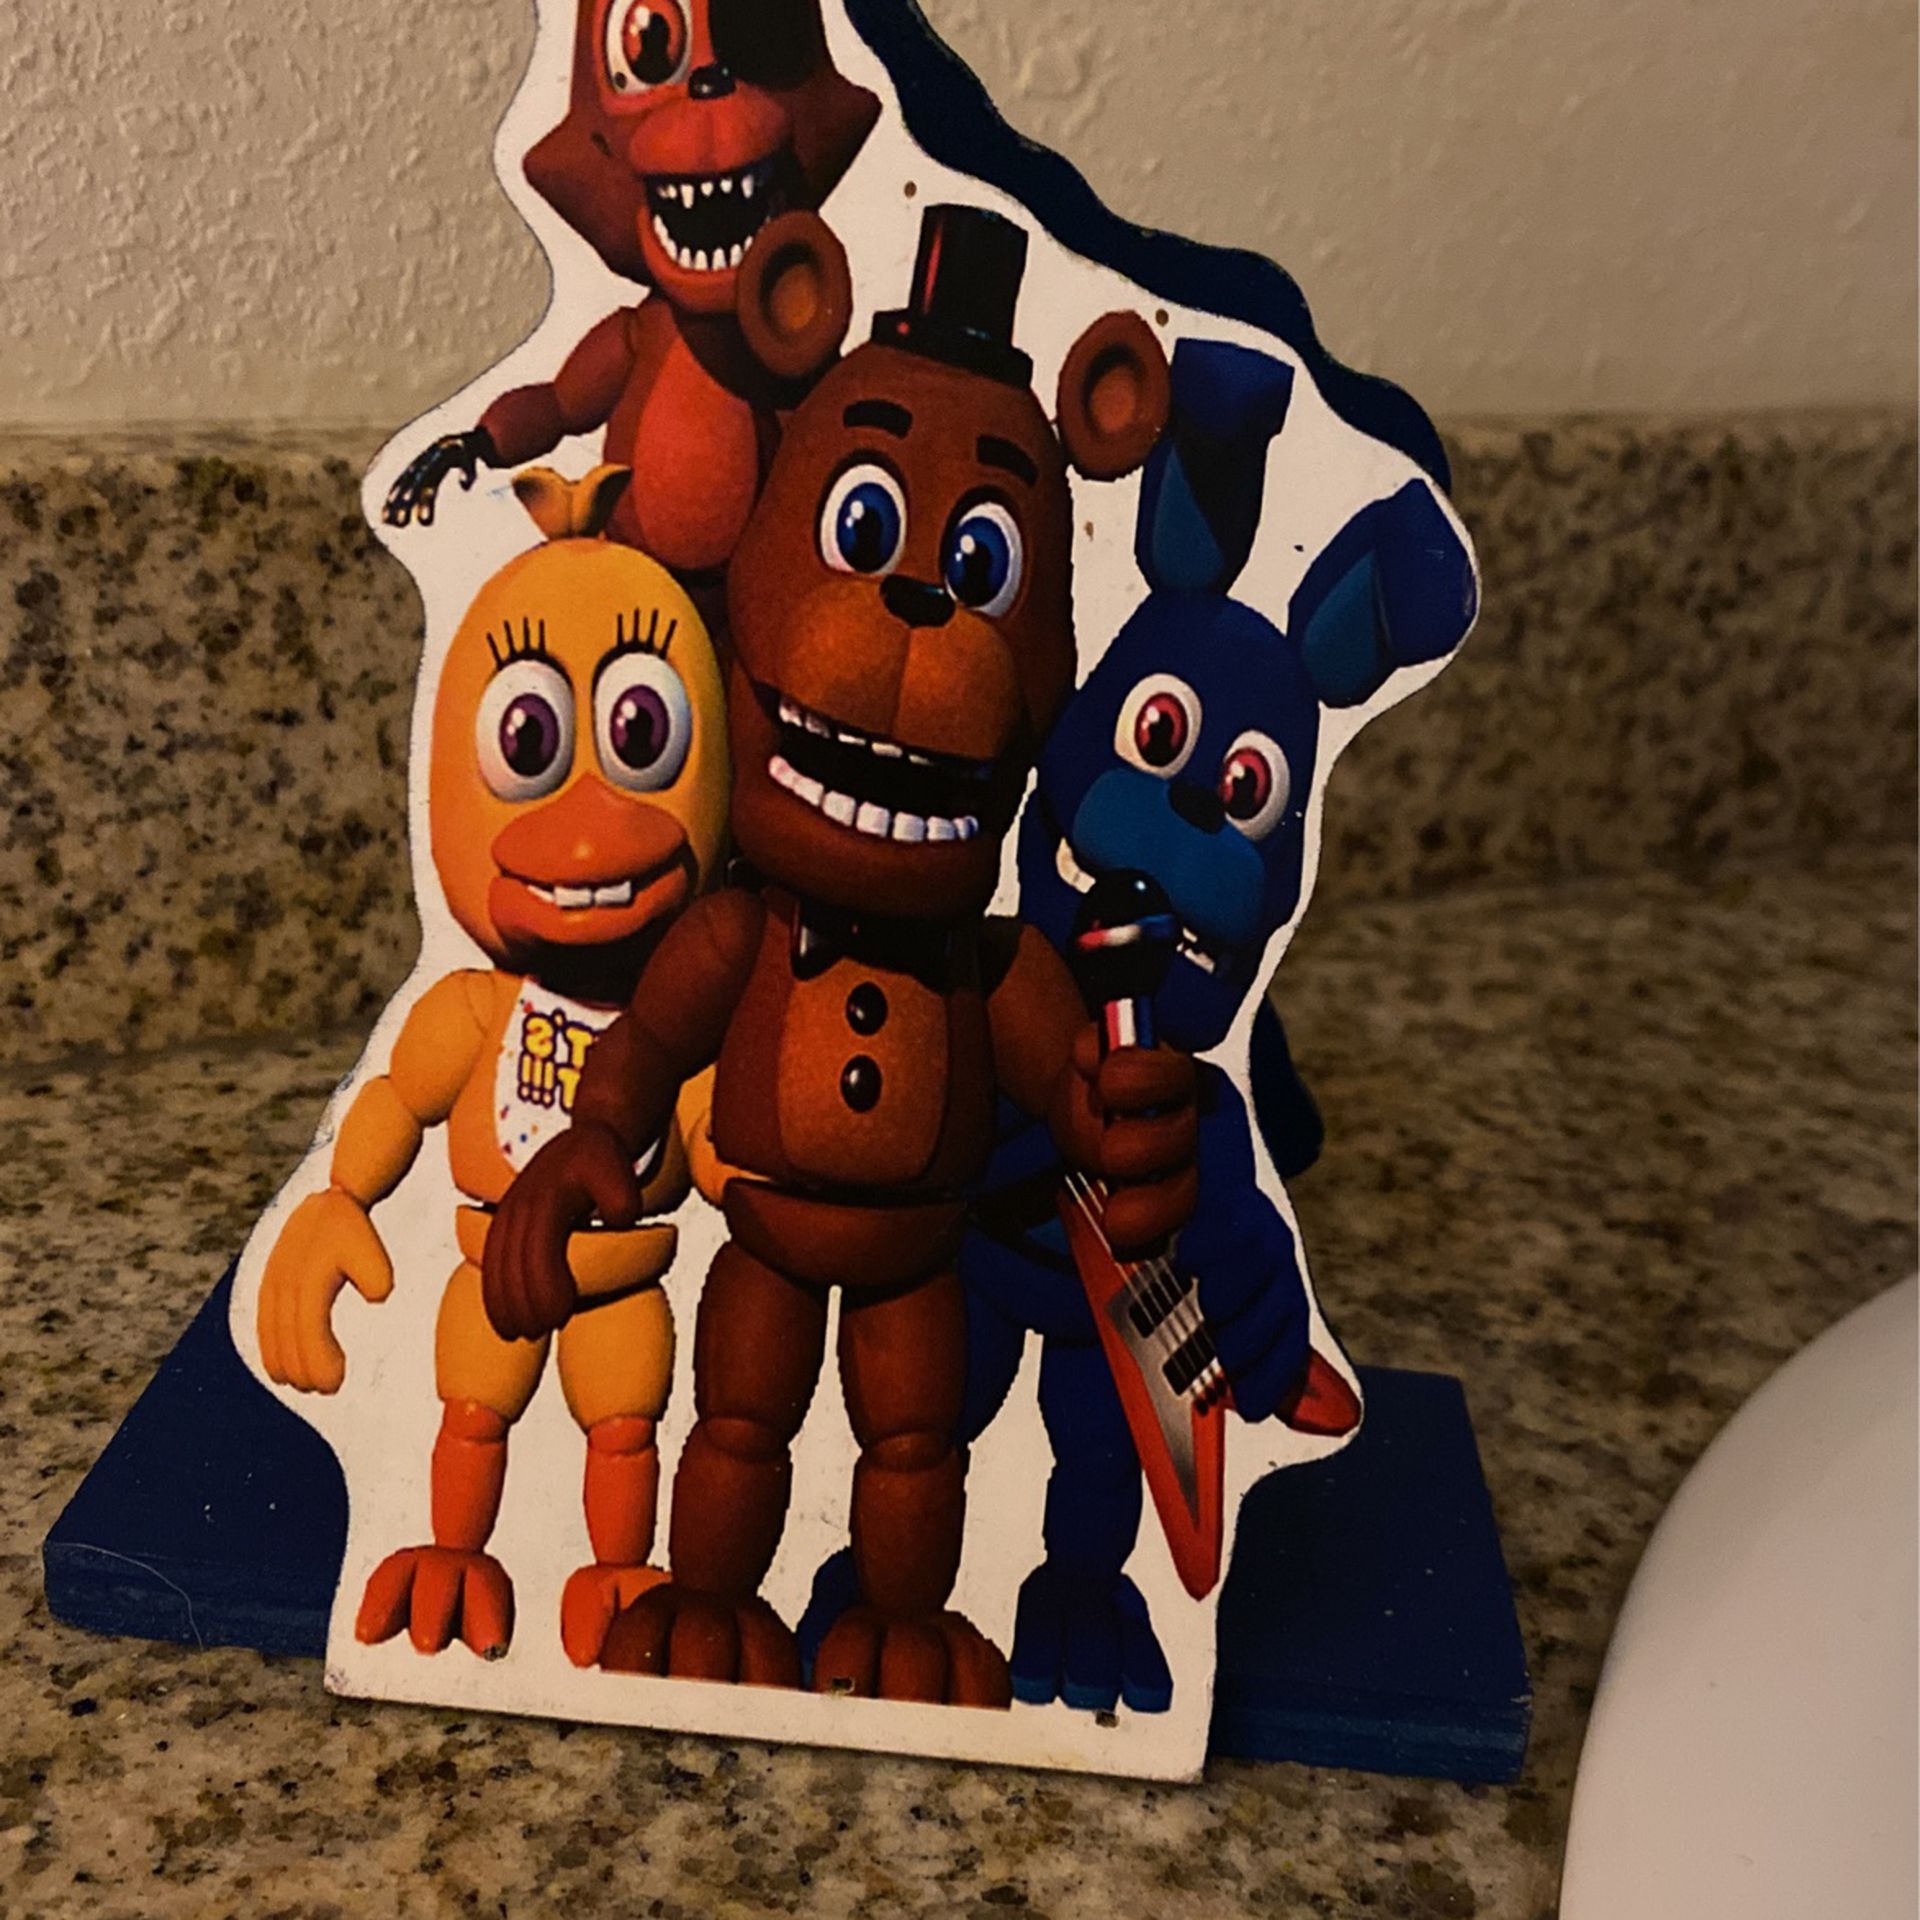 Five Nights At Freddy's Decorations for Sale in El Monte, CA - OfferUp